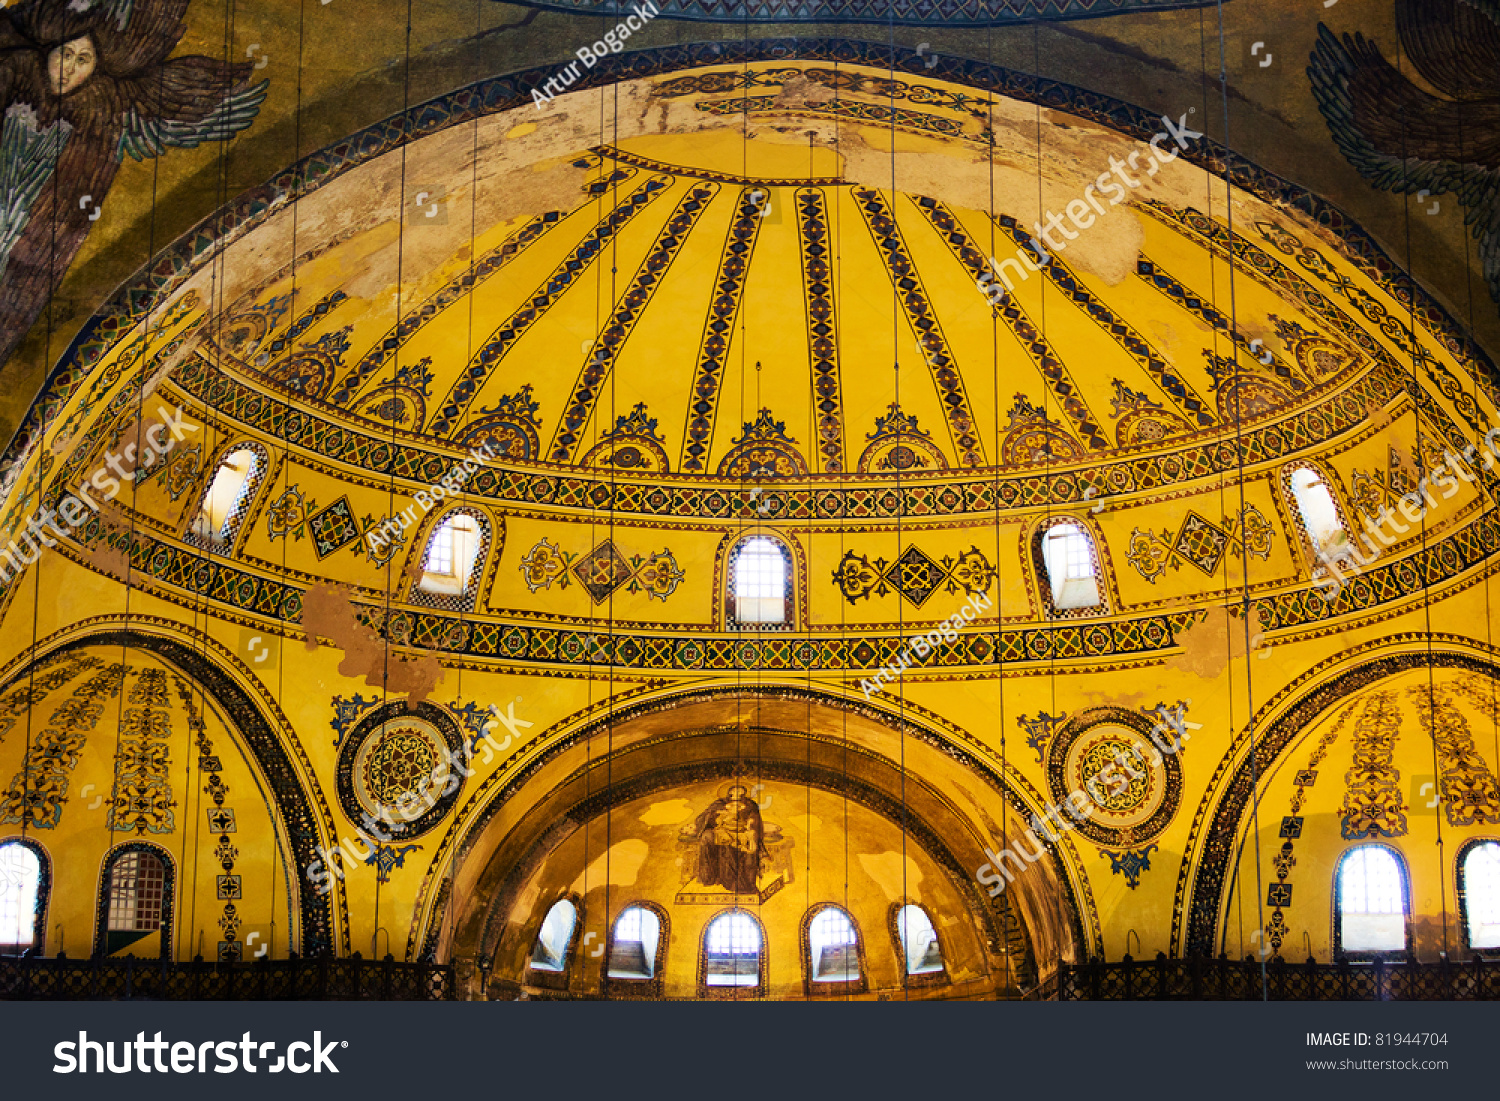 YongFoto 5x3ft Historical Building Indoor Room Photography Background World Famous Landmark Ancient Basilica Hagia Sophia Luxurious Hall Aged Dome Backdrop Portrait Photo Studio Props Photobooth